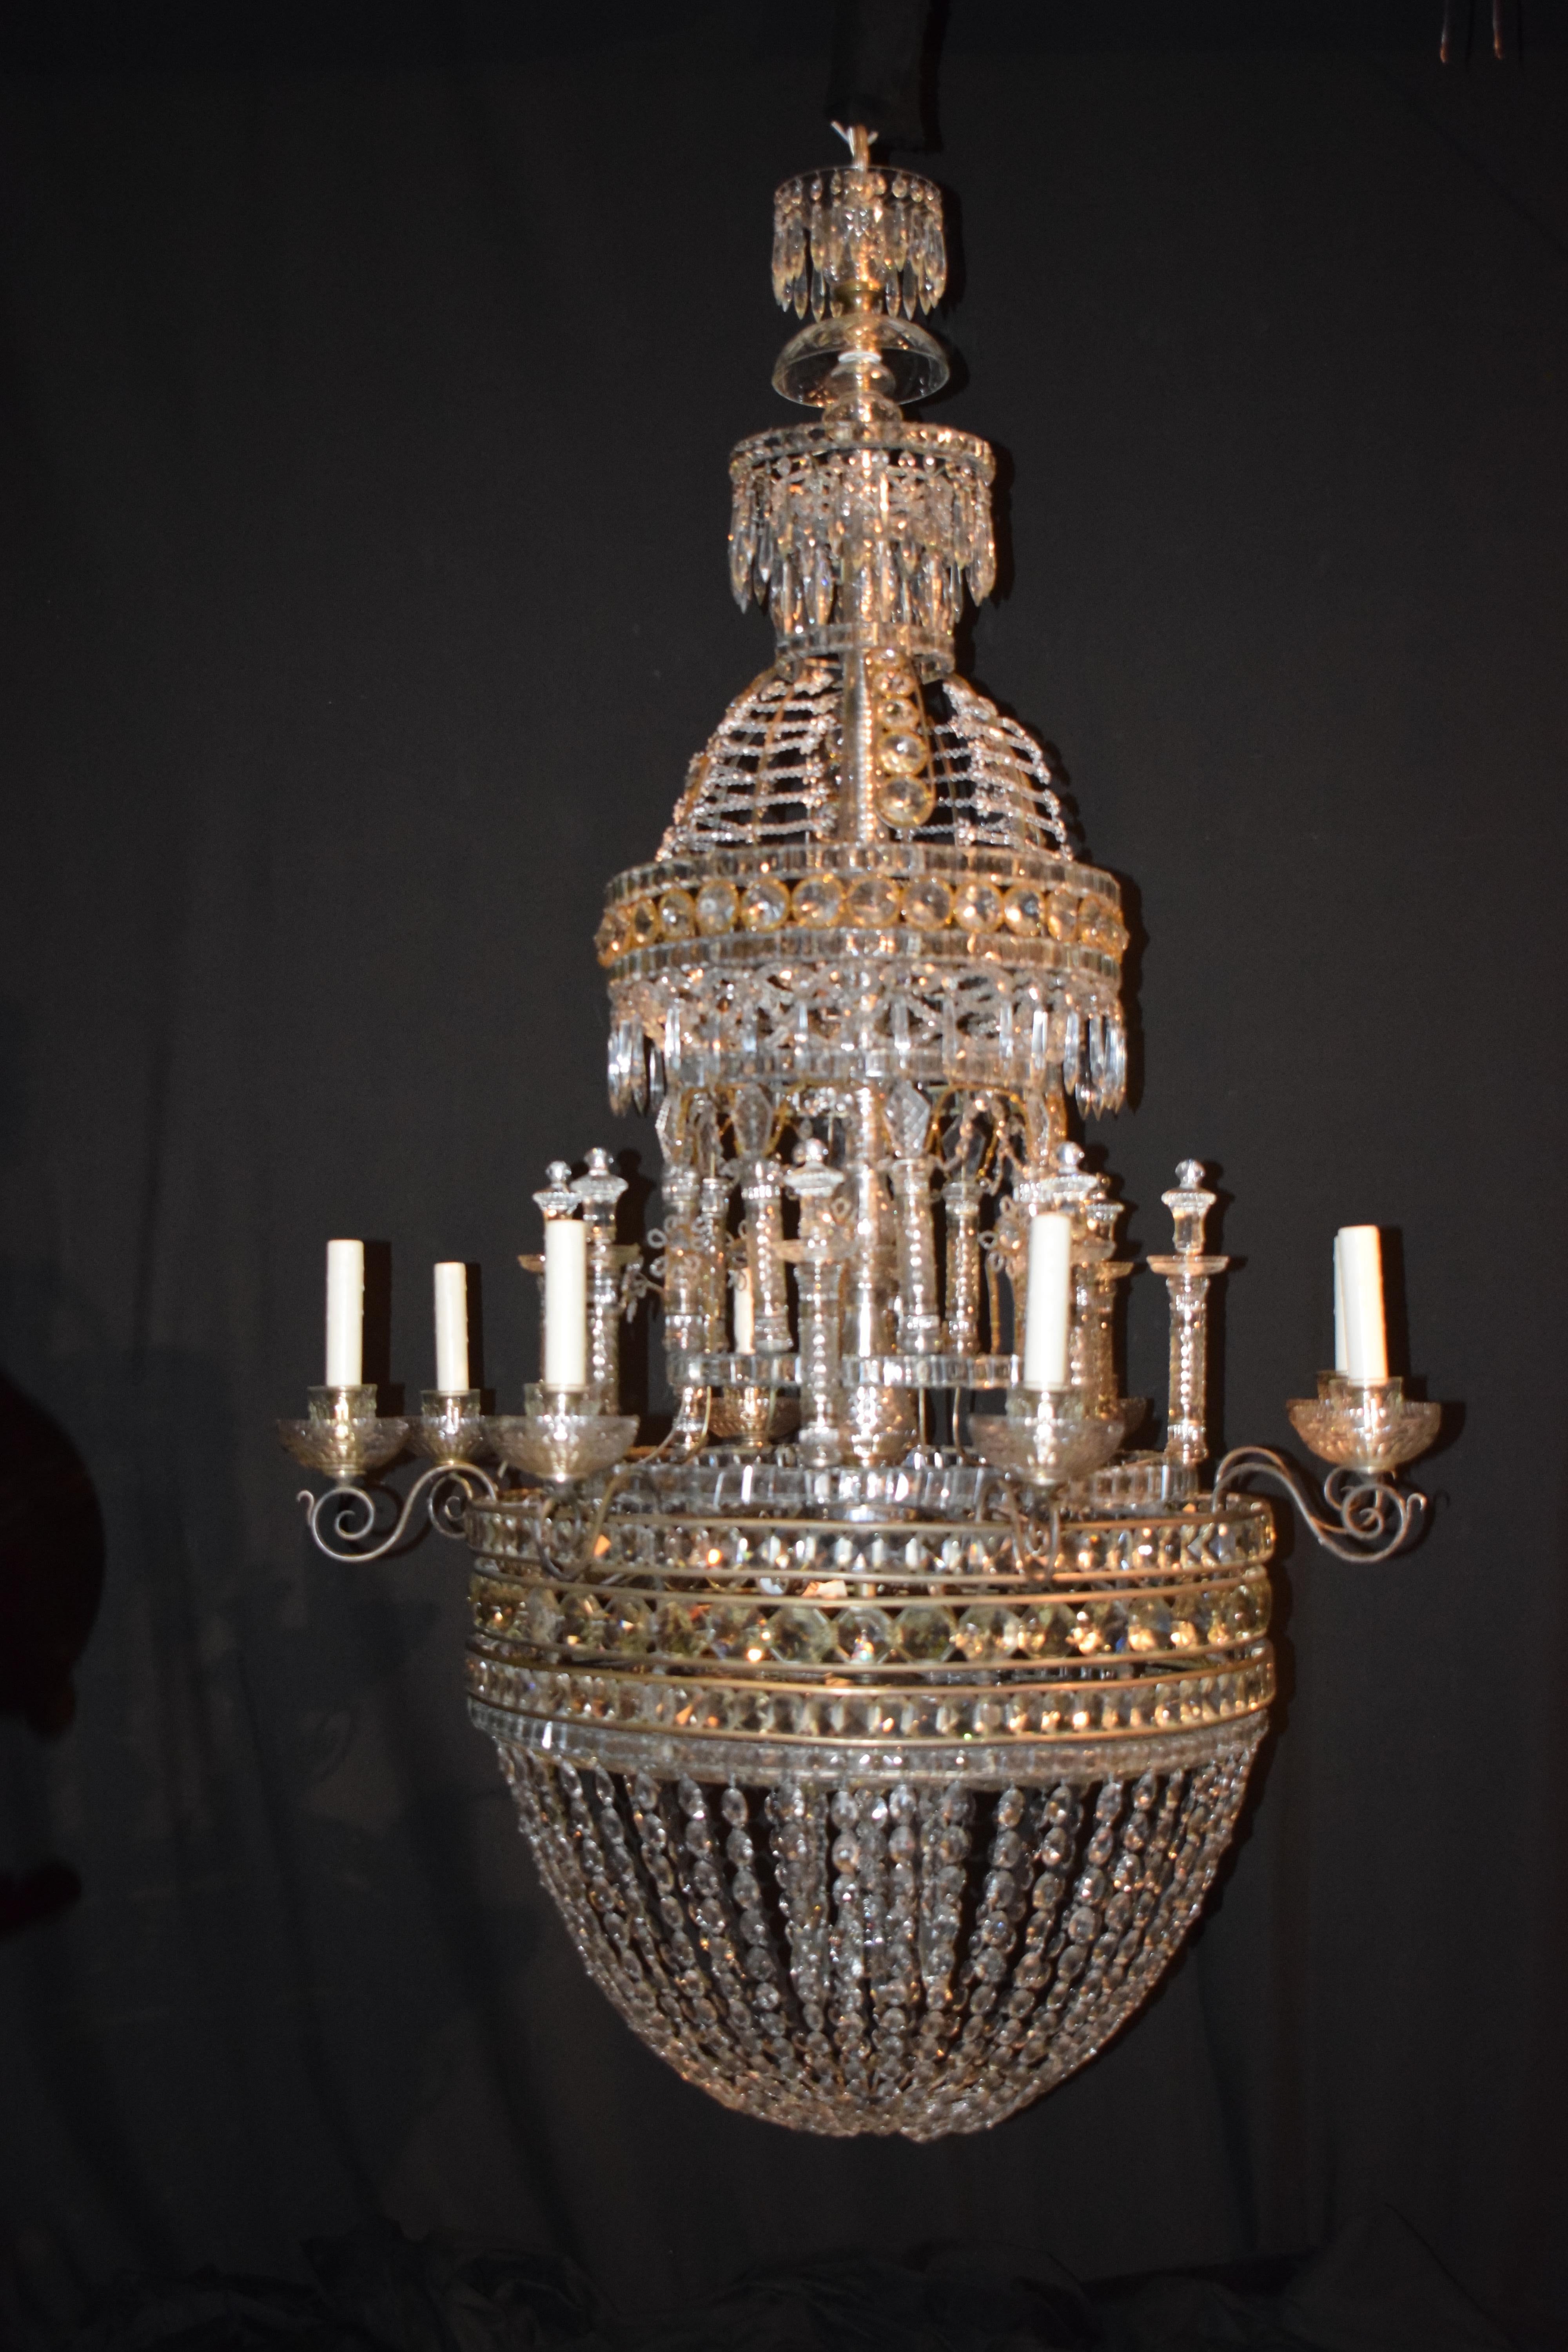 A Magnificent Baltic Chandelier featuring elaborate bead work as well as graduated oval crystal bead chains, crystal columns and finials. 12 lights (8+4).
France, circa 1900.
Dimensions: Height 68